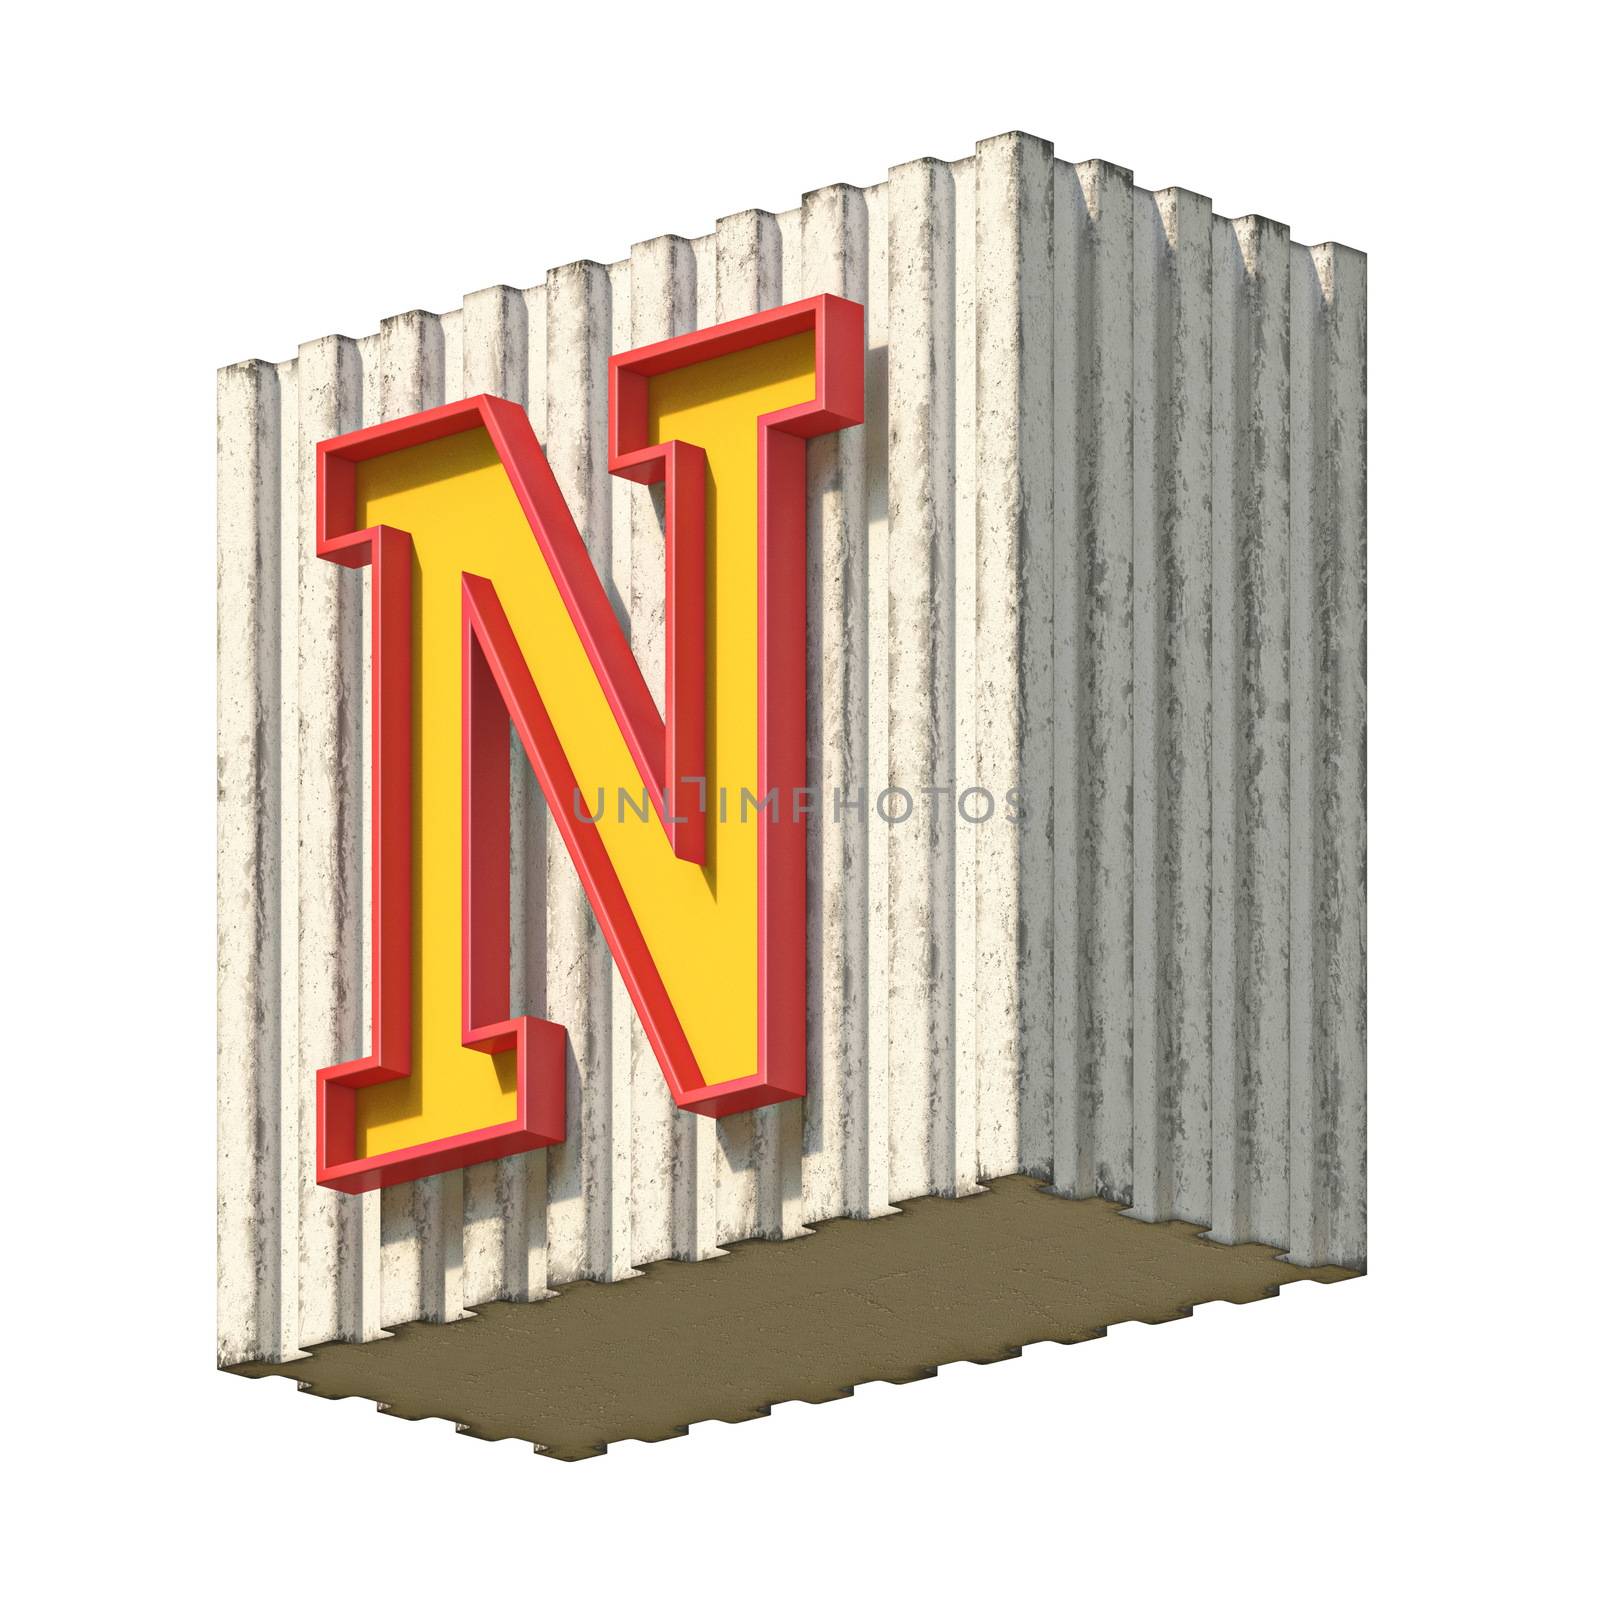 Vintage concrete red yellow font Letter N 3D render illustration isolated on white background